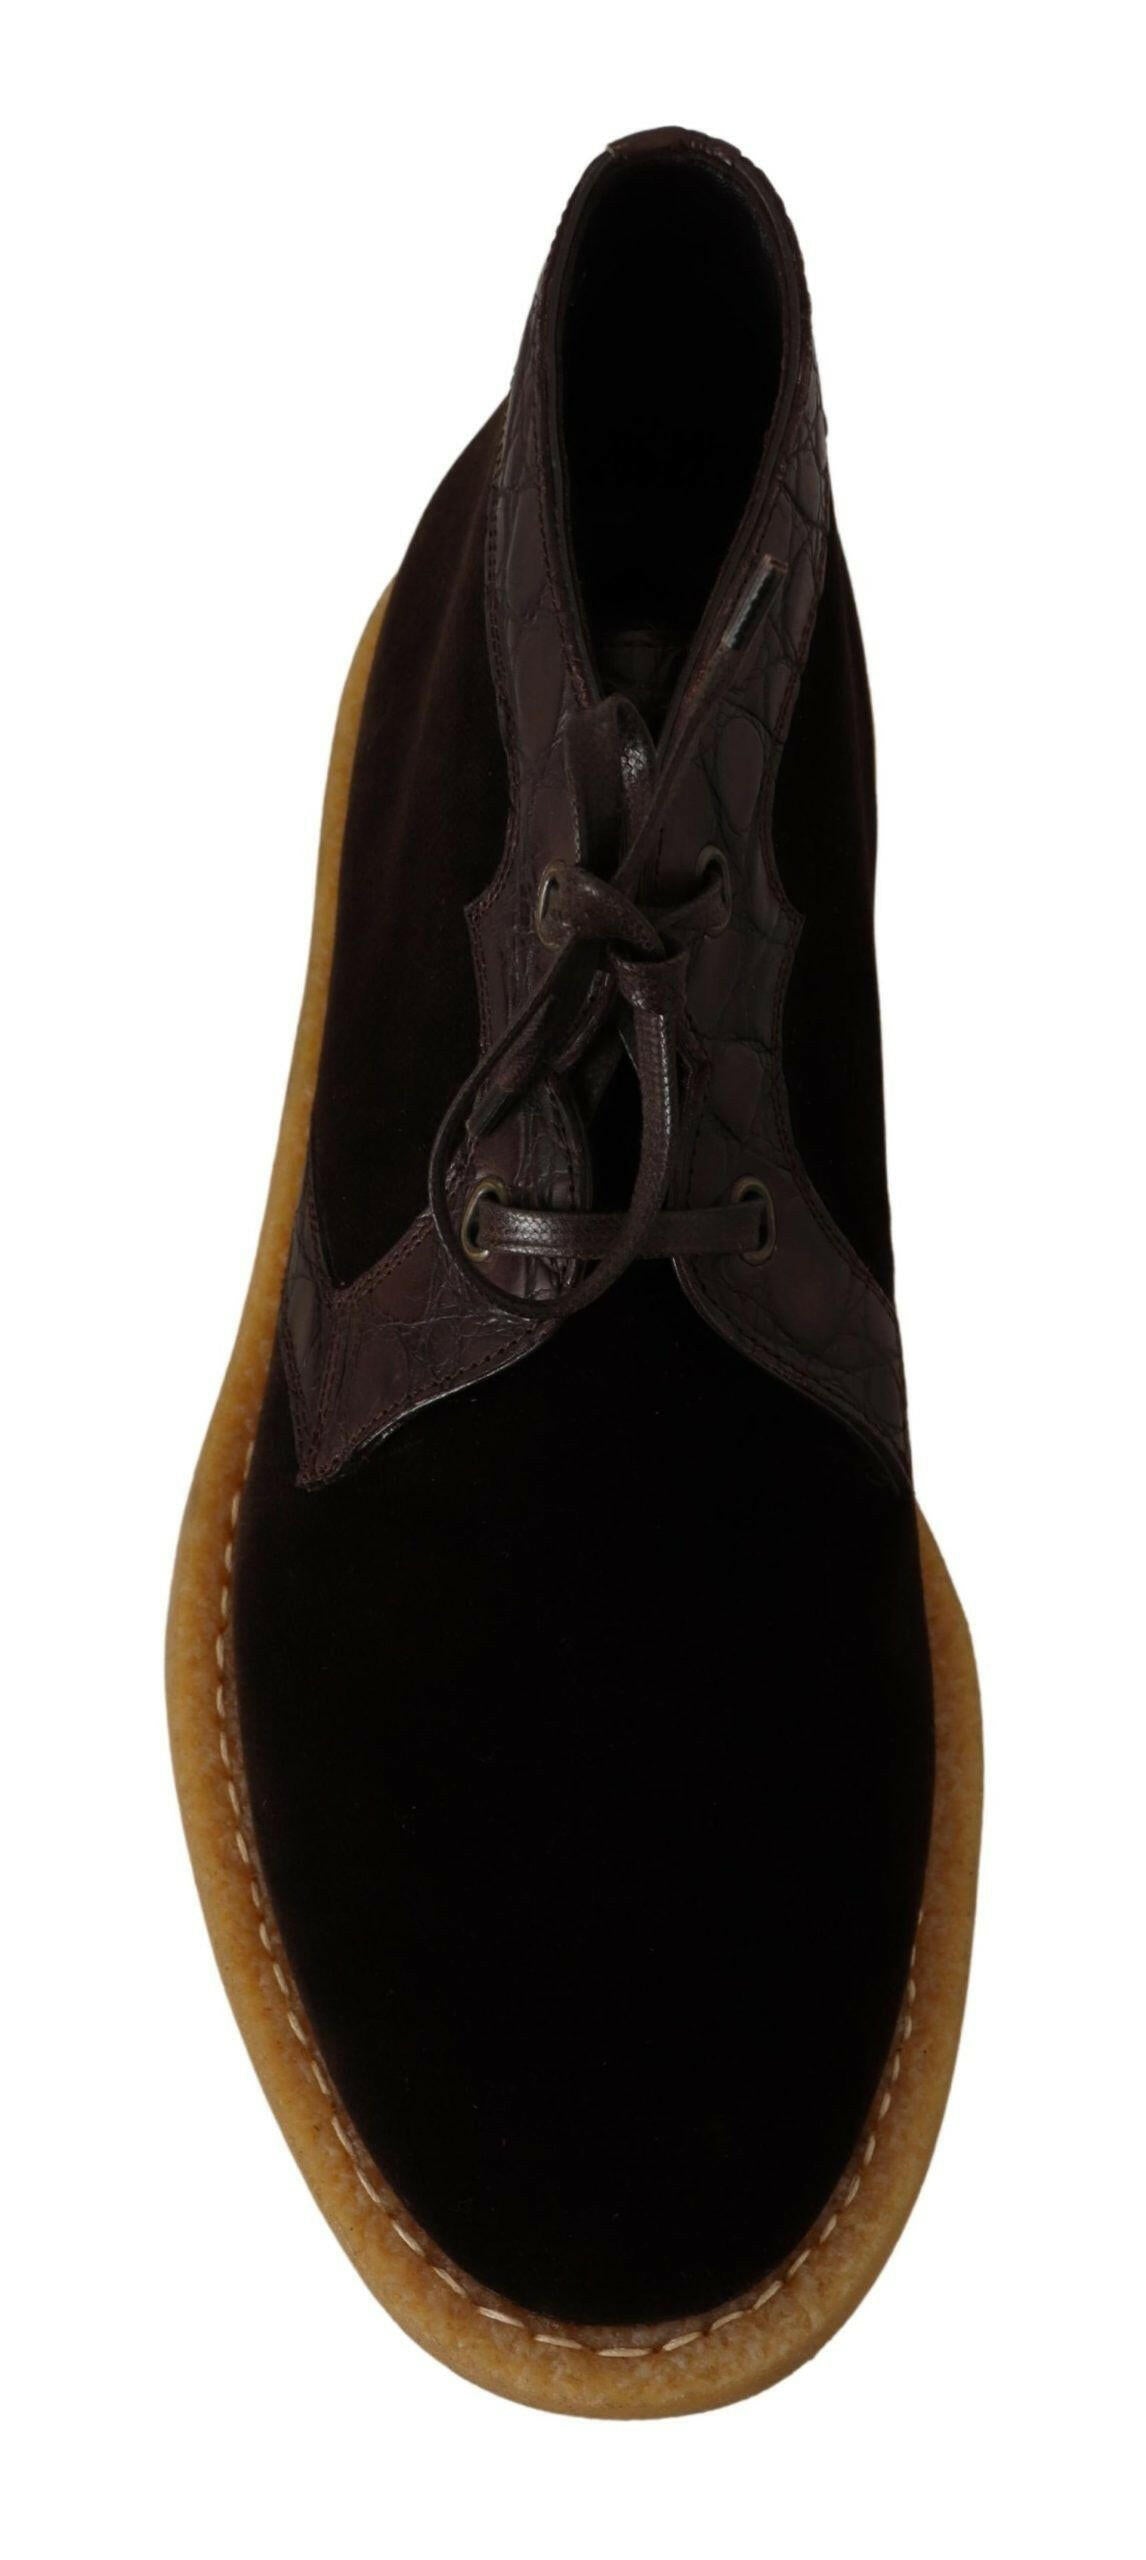 Dolce & Gabbana Brown Velvet Exotic Leather Boots - GENUINE AUTHENTIC BRAND LLC  